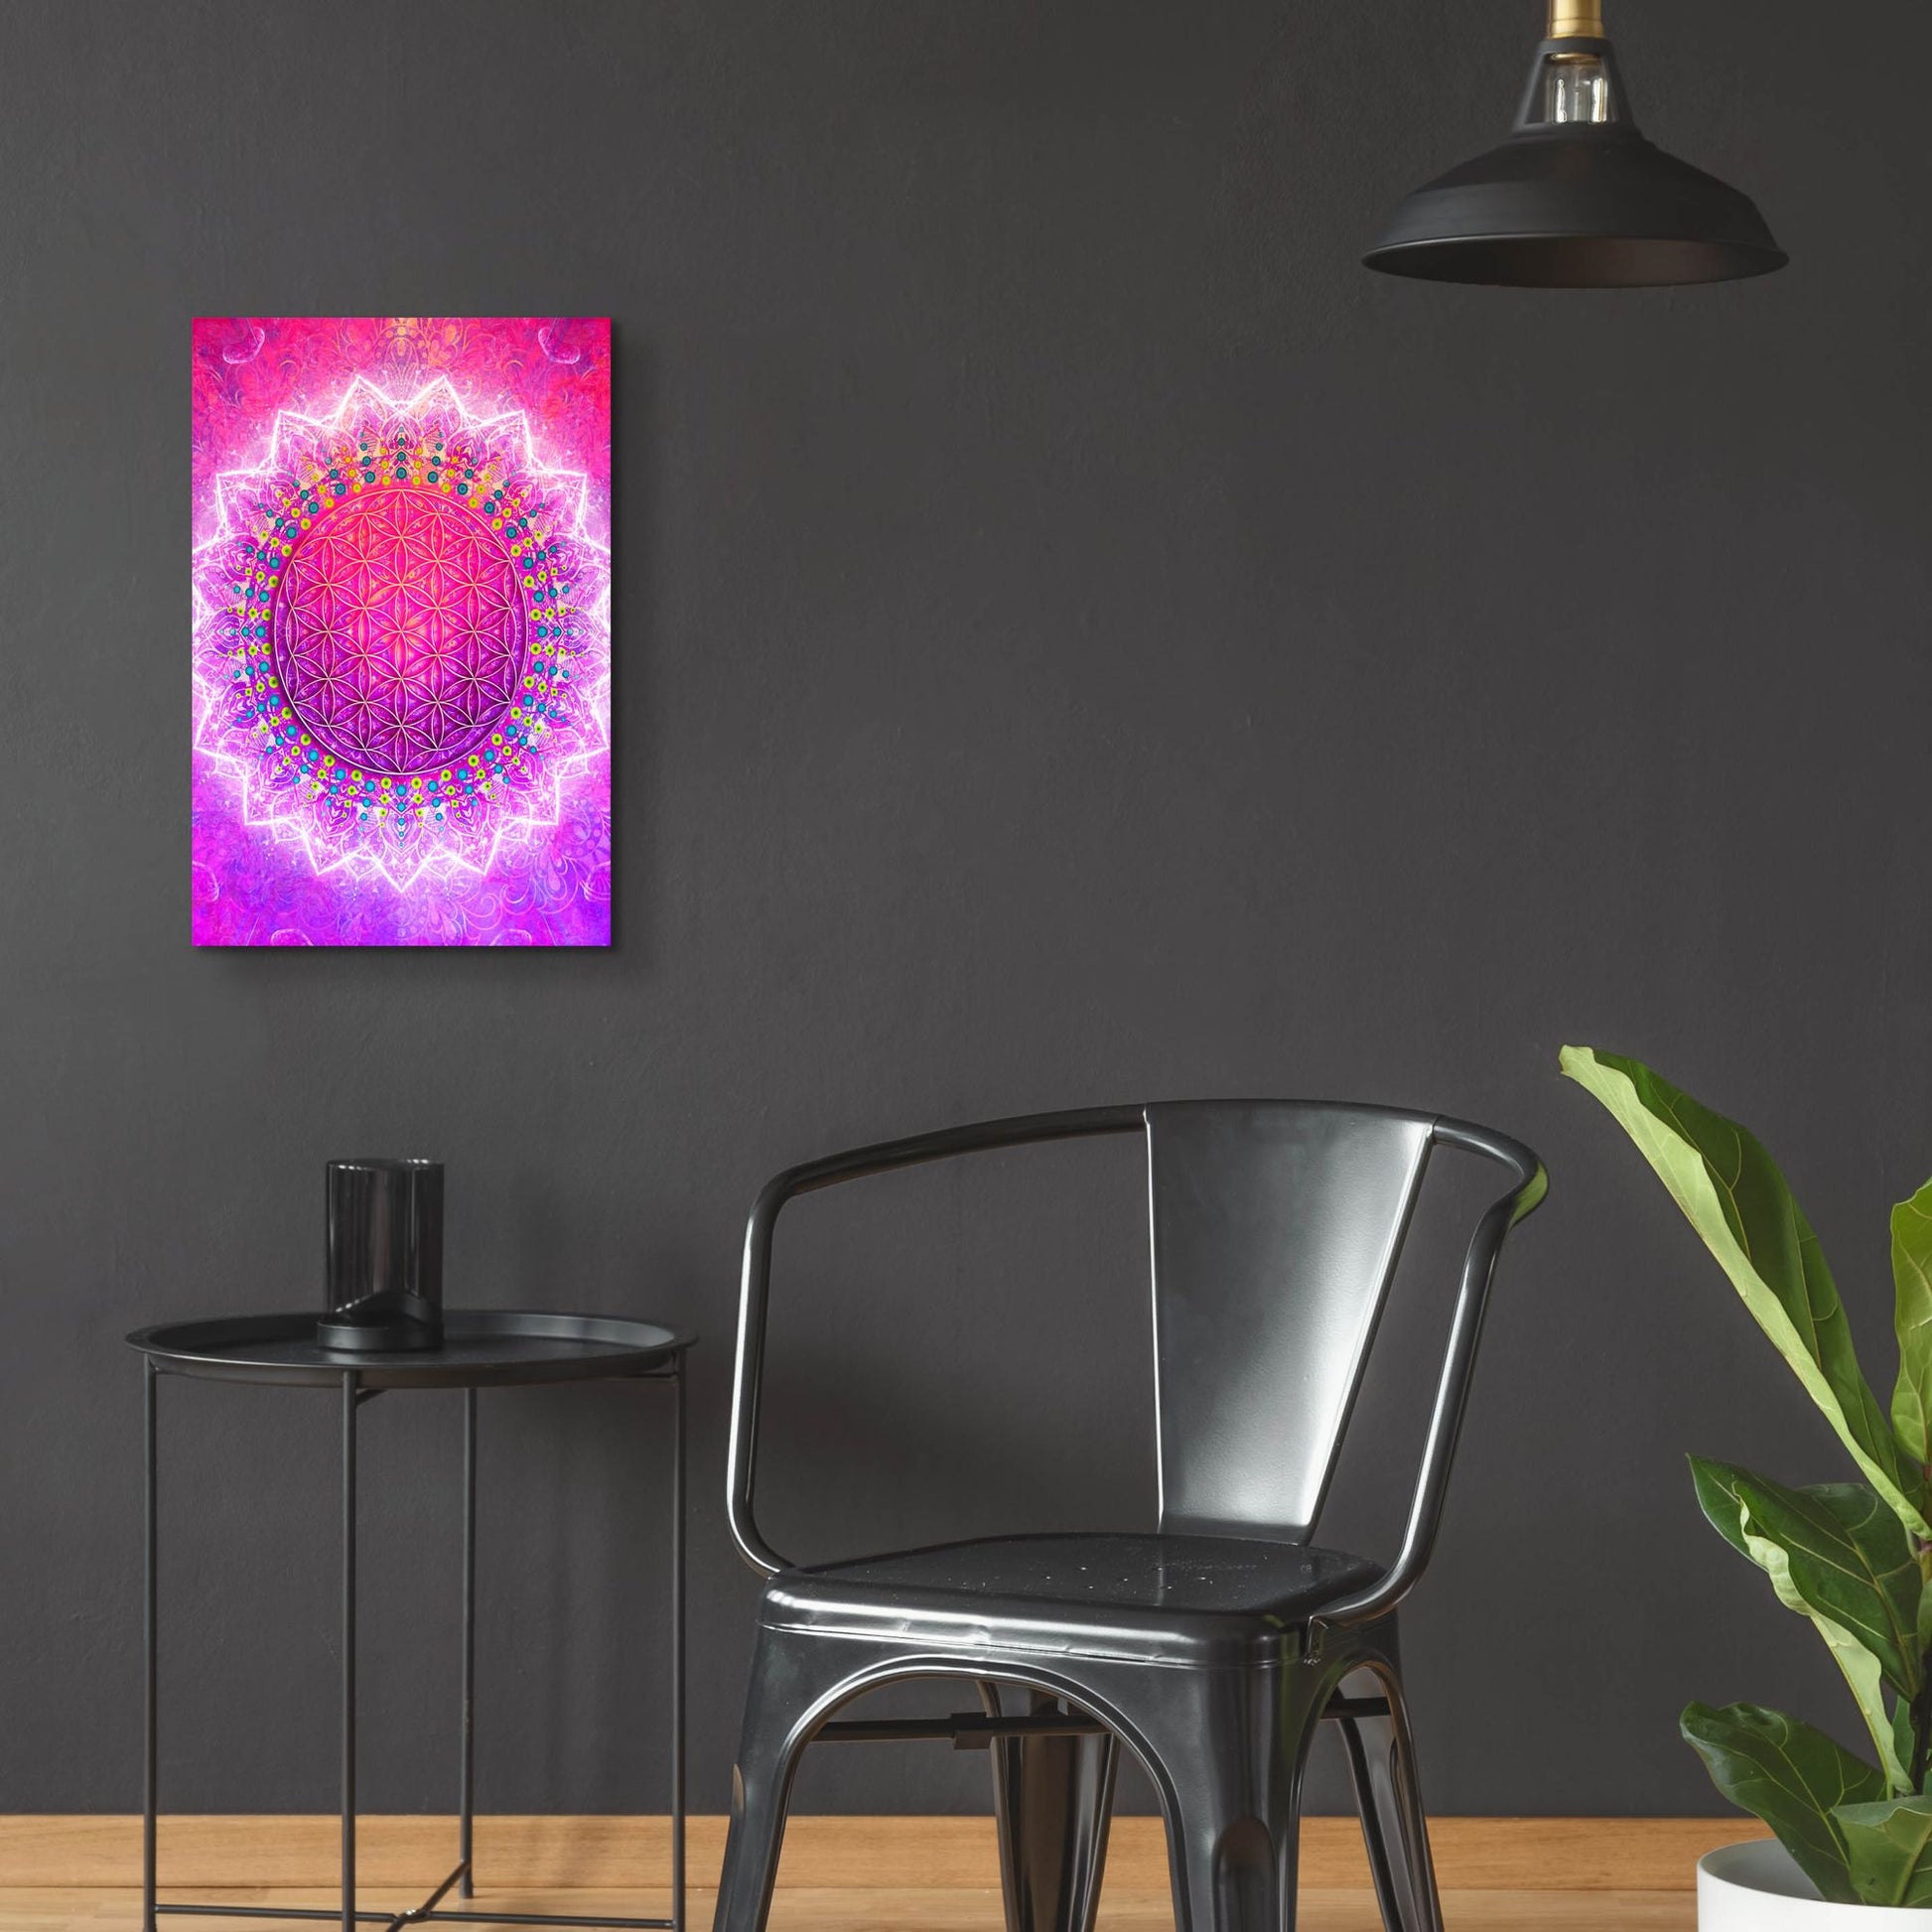 Epic Art 'Flower Of Life' by Cameron Gray, Acrylic Glass Wall Art,16x24